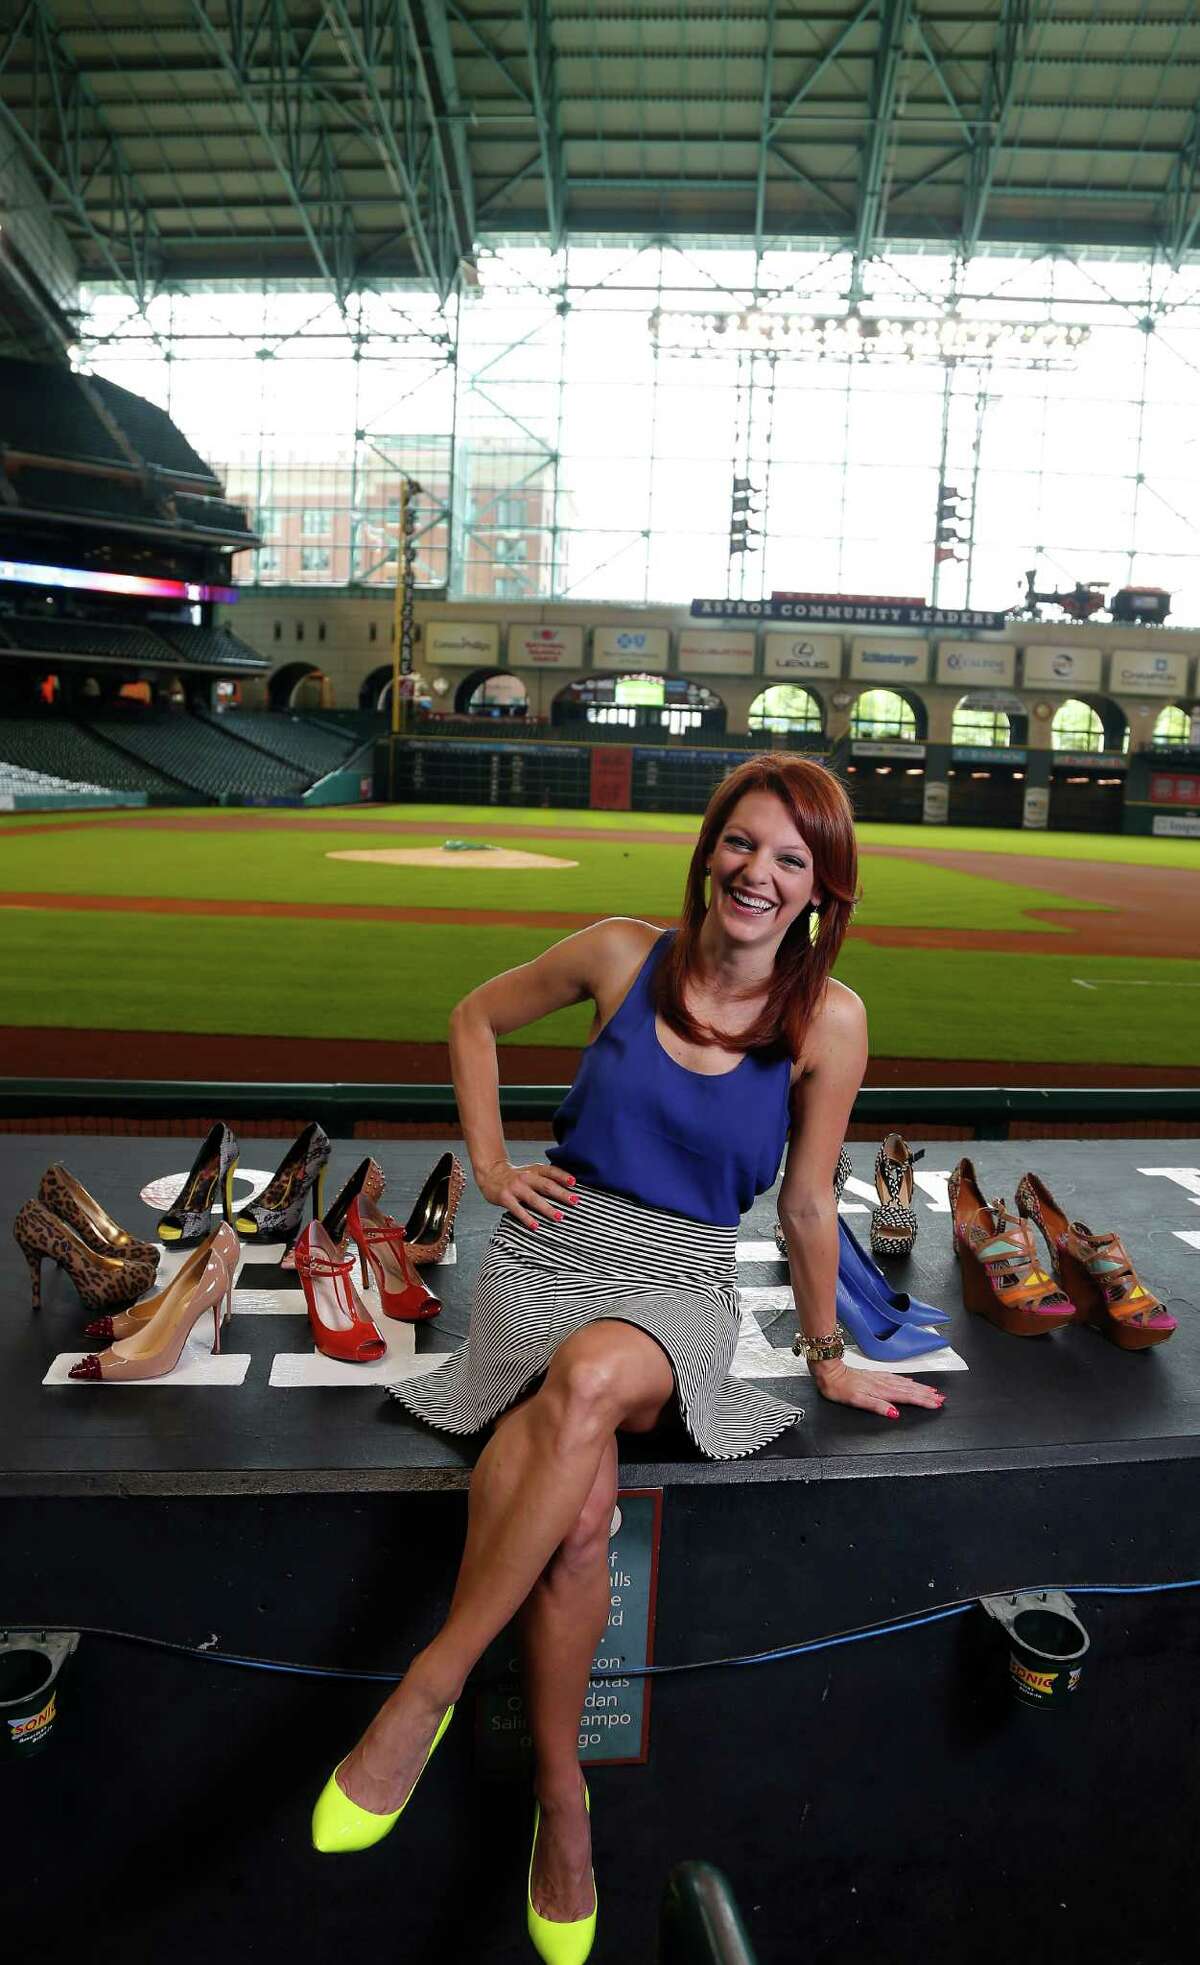 Julia Morales' shoes are a home run.